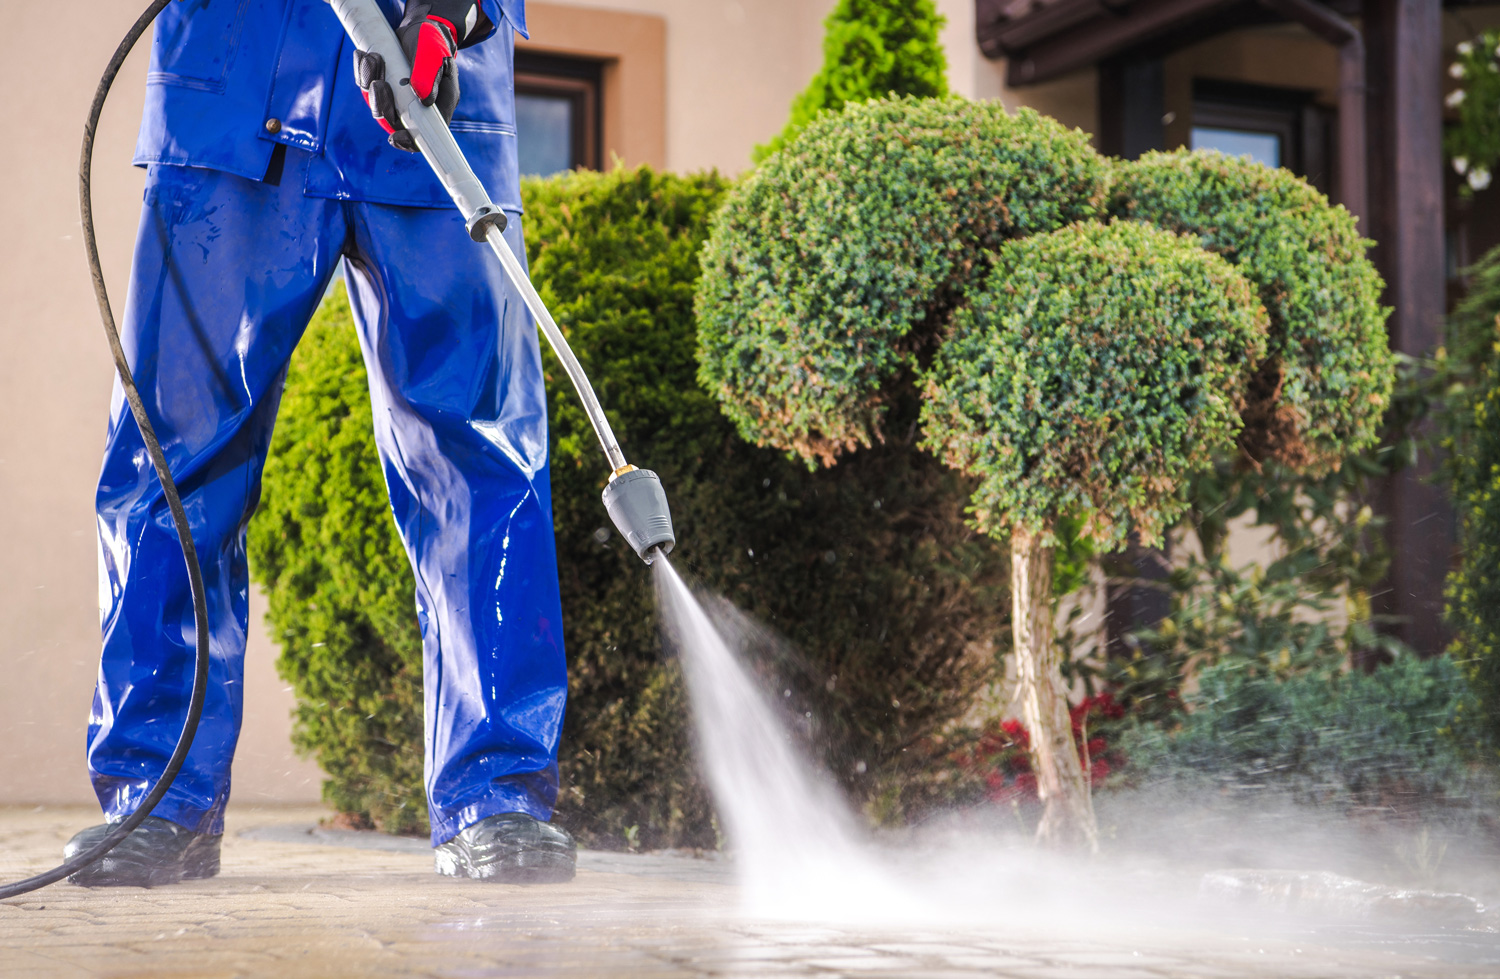 Caucasian Worker in His 30s with Pressure Washer Cleaning Residential Driveway. Garden and Home Surrounding Maintenance.